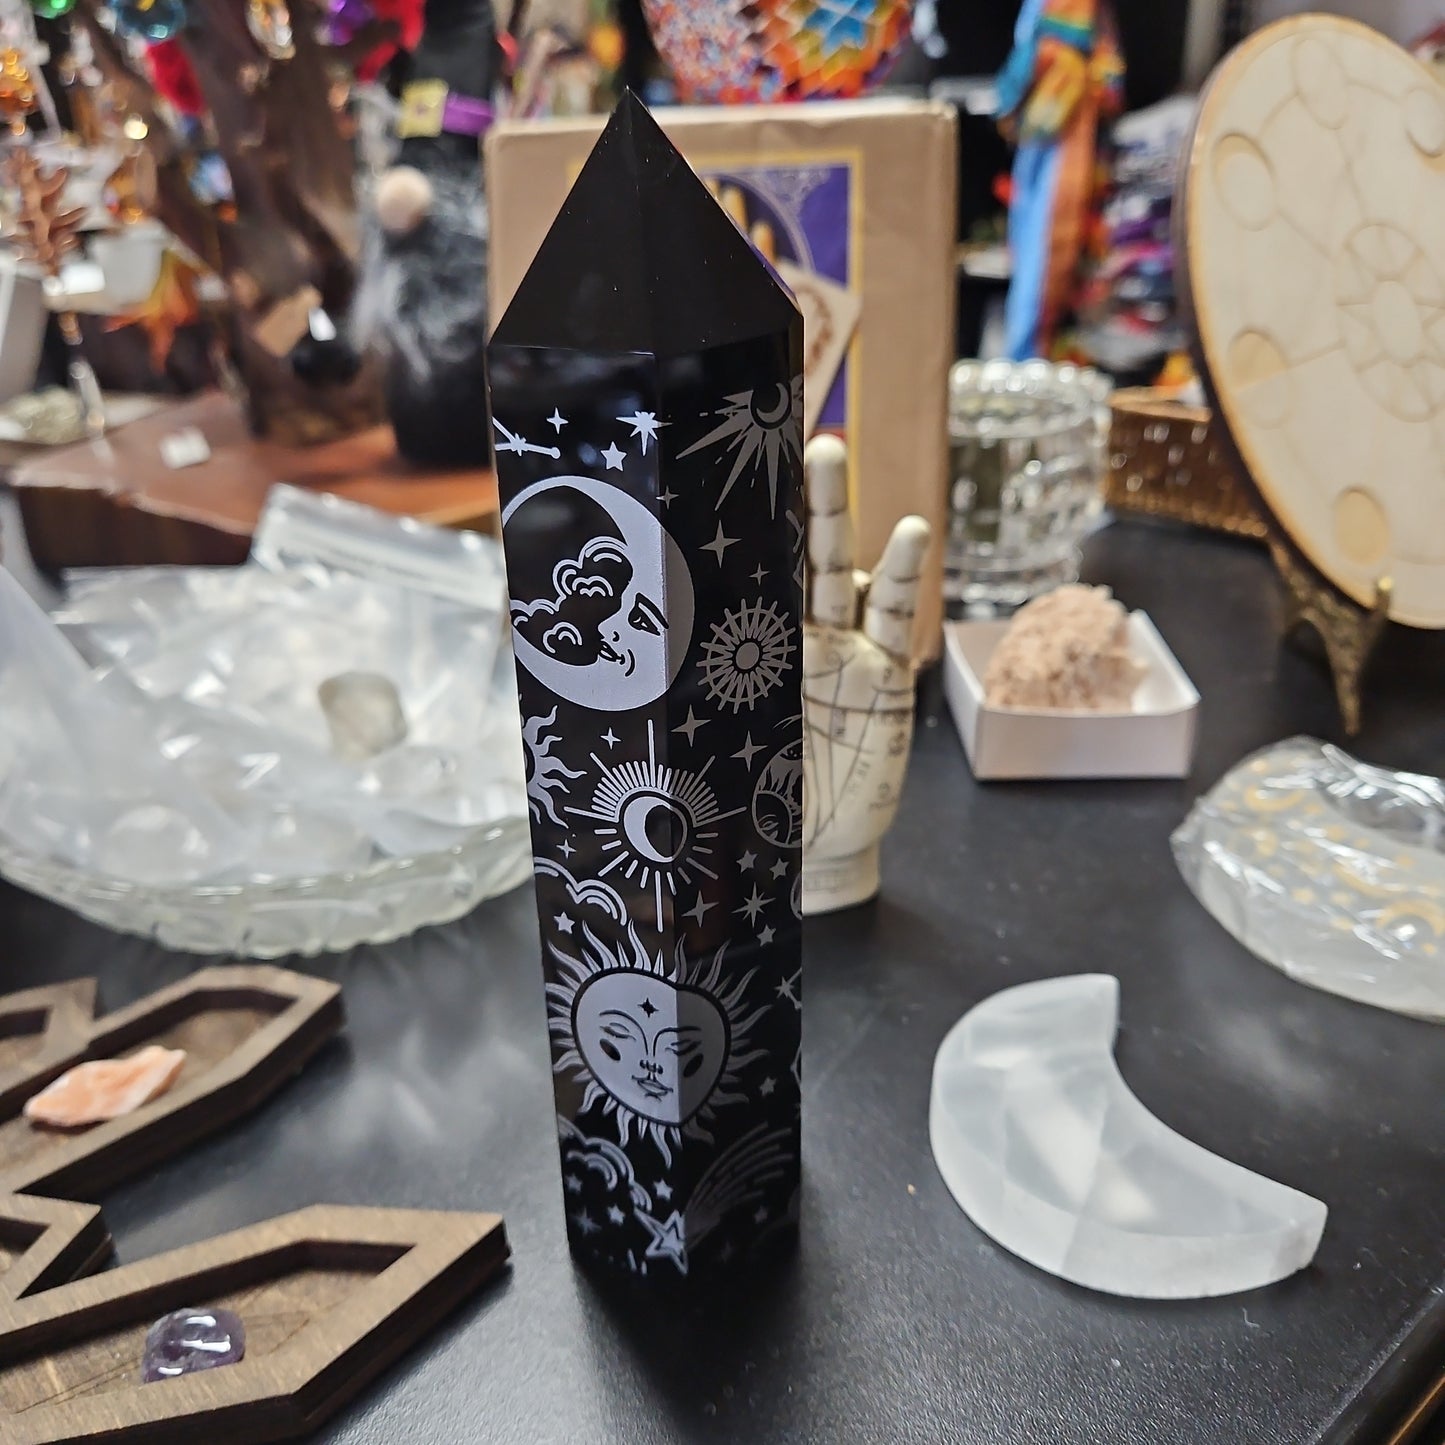 Black Obsidian Tower with Sun and Moons 9" (SILVER)